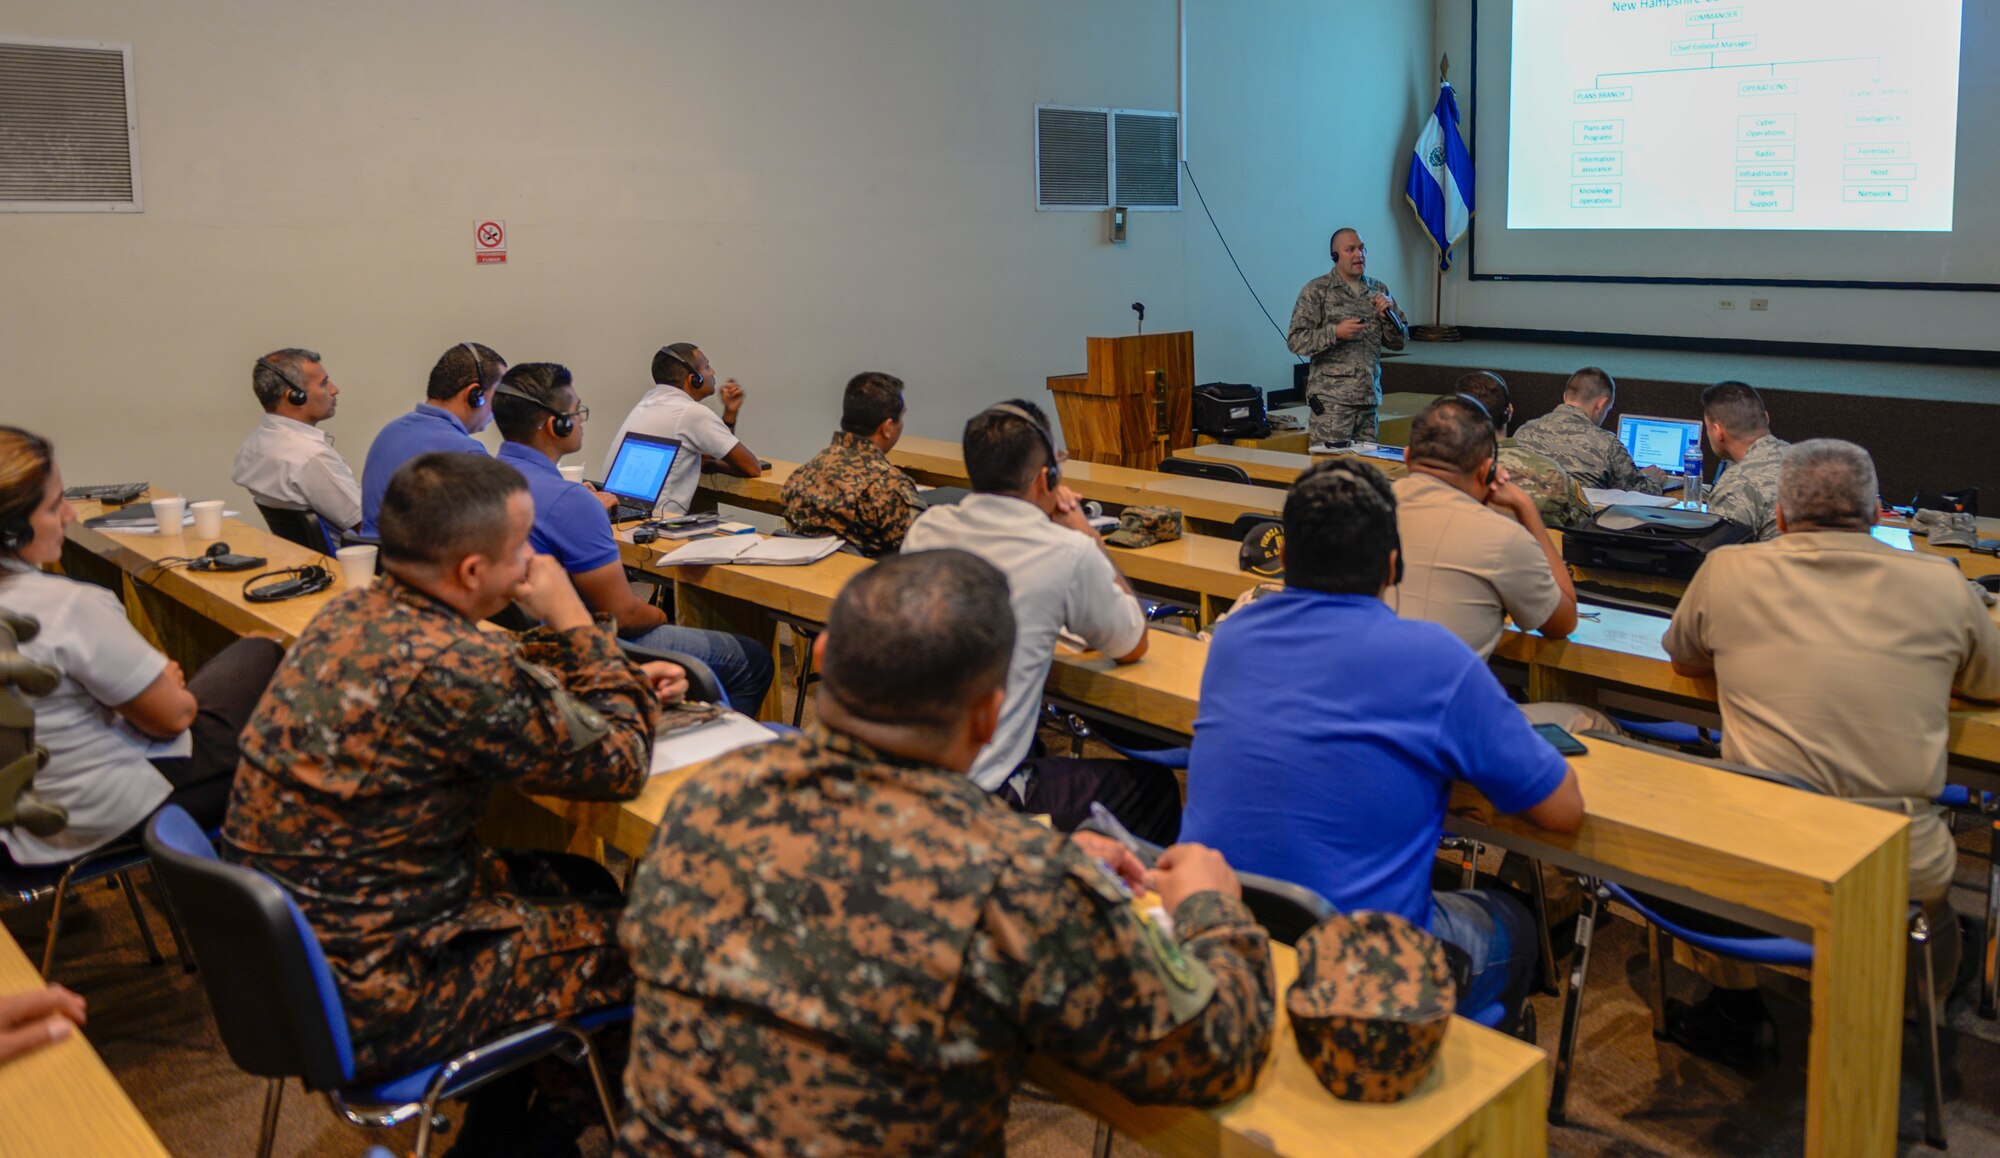 U.S. Air Force Master Sgt. Gabriel Howard, a cyber transport specialist assigned to the 157th Communications Flight, New Hampshire Air National Guard, discusses organizational structure with soldiers and civilians from La Fuerza Armada de El Salvador as it relates to managing cyber security and cyber defense systems, San Salvador, El Salvador, Sept. 25, 2018. Howard is part of a small National Guard team that is sharing best practices with the Salvadoran Army as part of the ongoing partnership between New Hampshire and El Salvador under the National Guard State Partnership Program. (N.H. Air National Guard photo by Tech. Sgt. Aaron Vezeau)